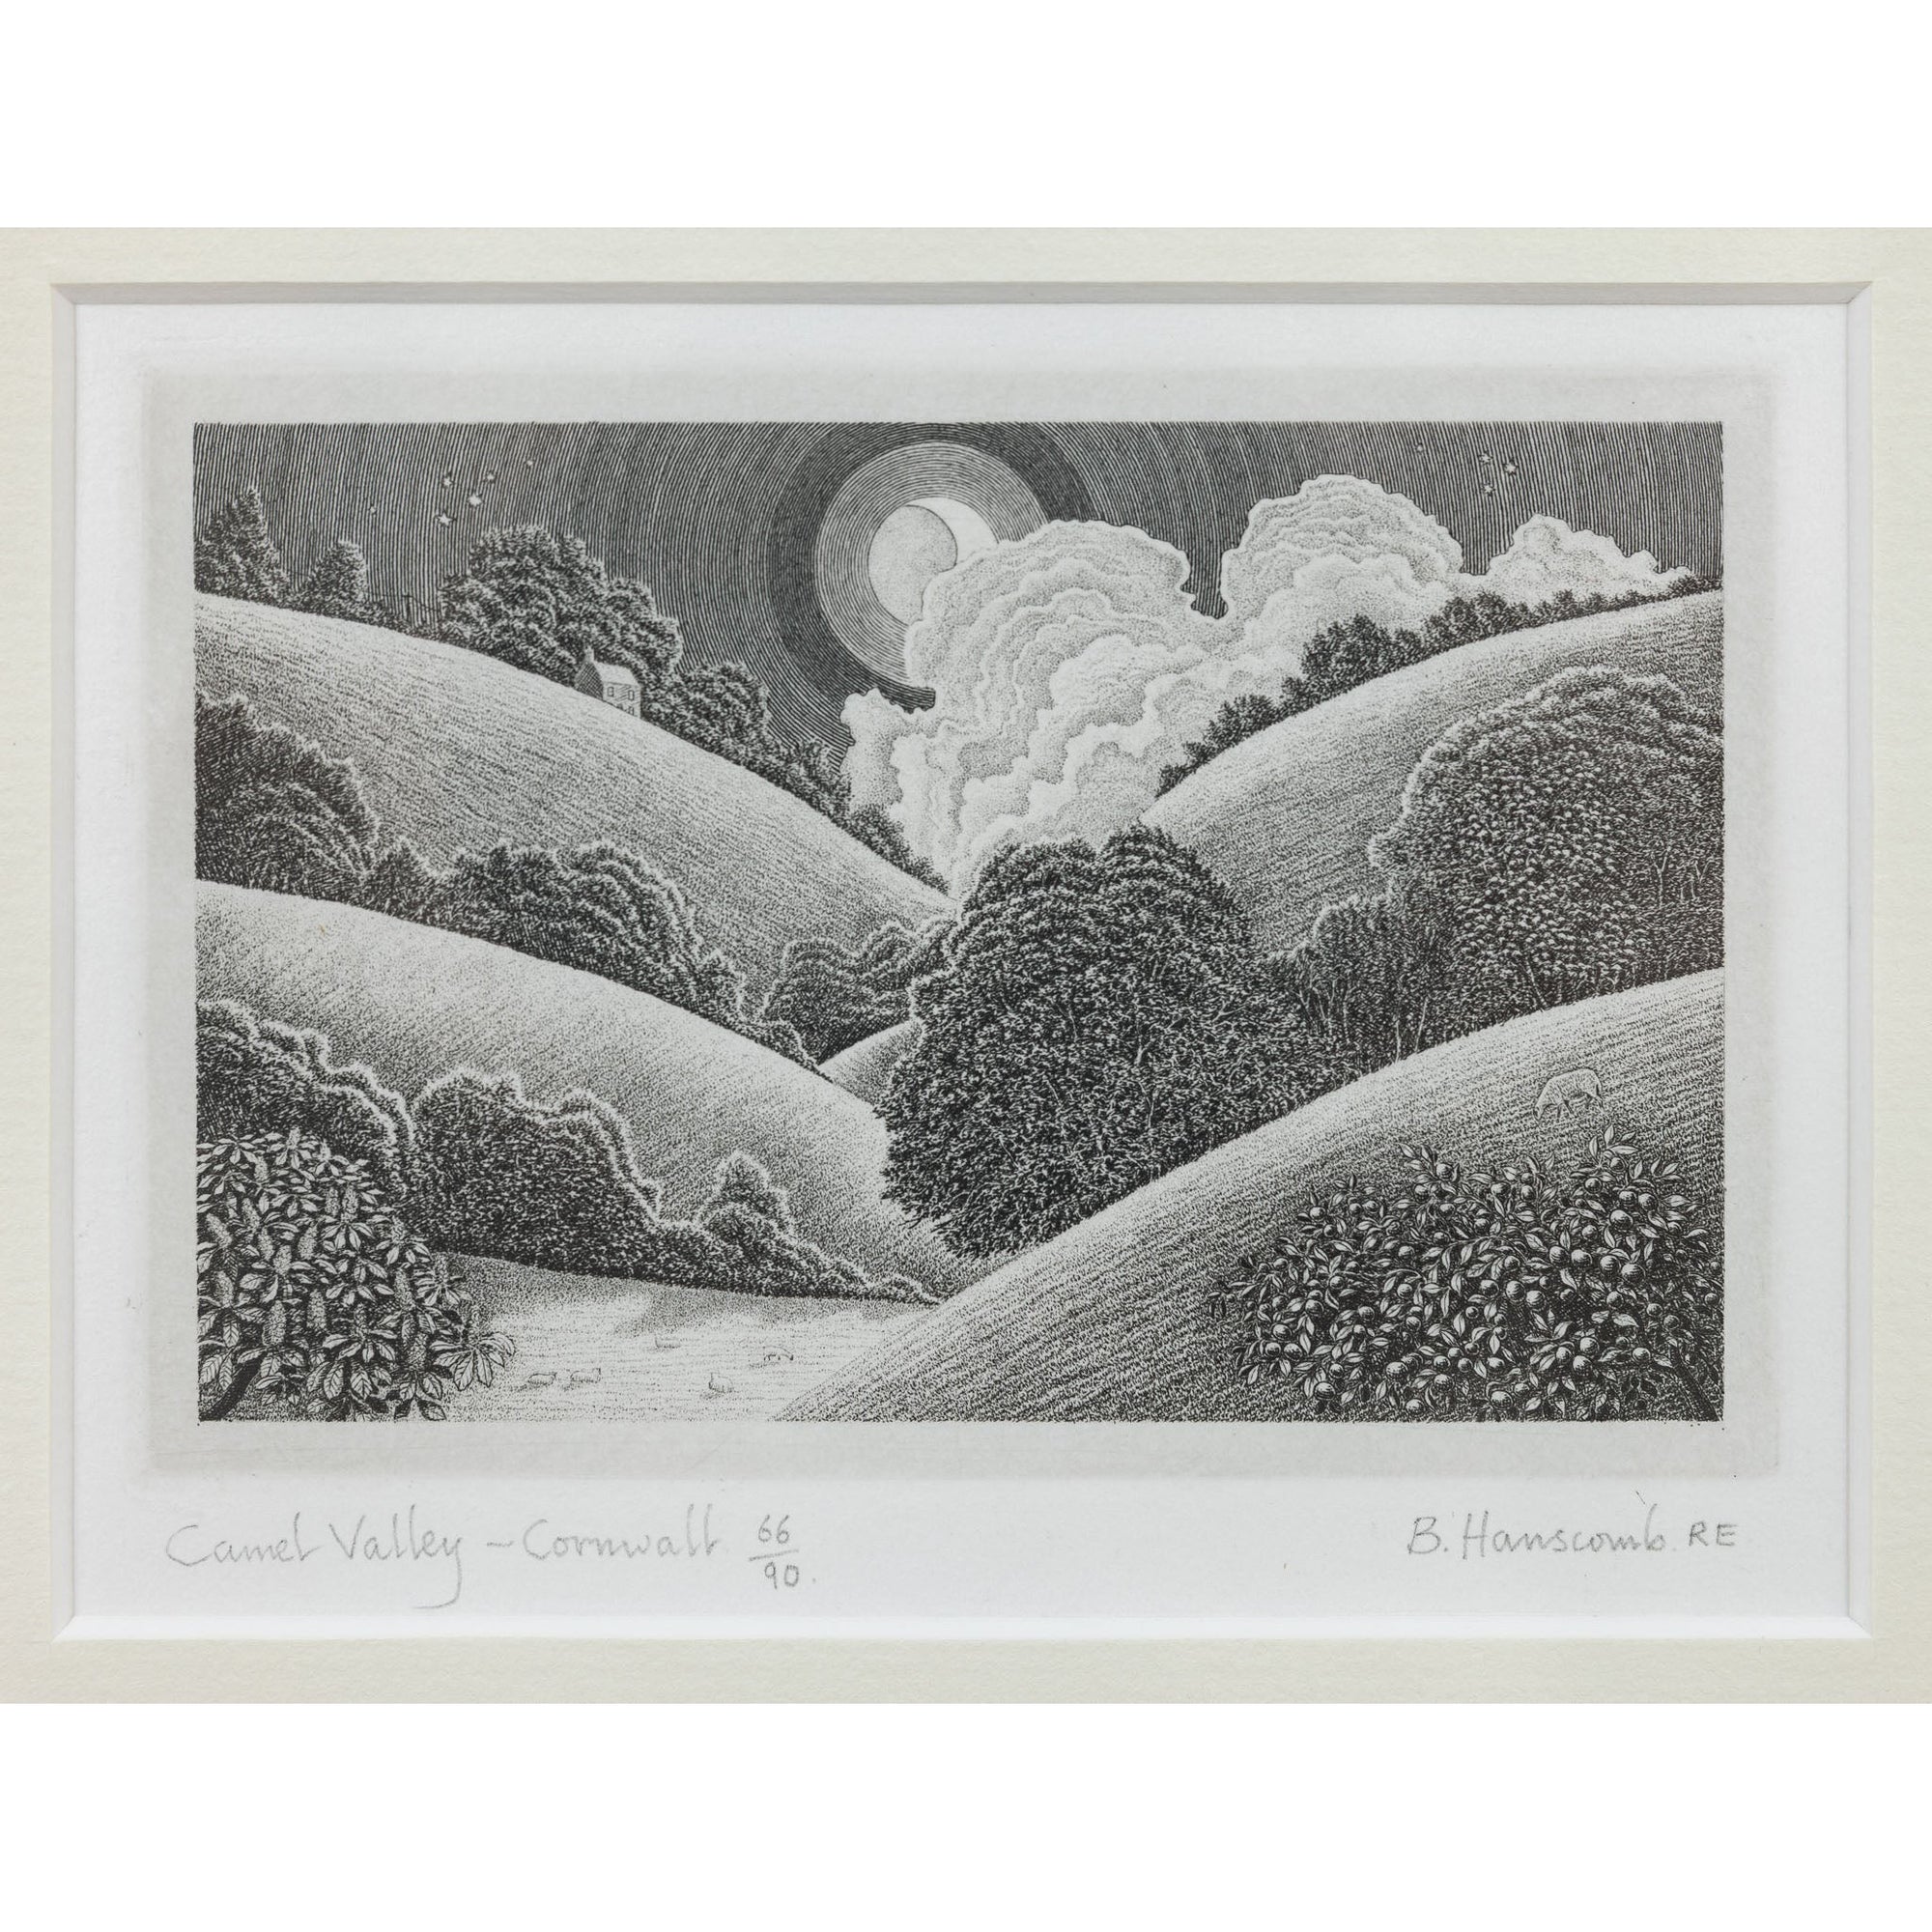 'Camel Valley - Cornwall' copperplate engraving by Brian Hanscomb, available at Padstow Gallery, Cornwall